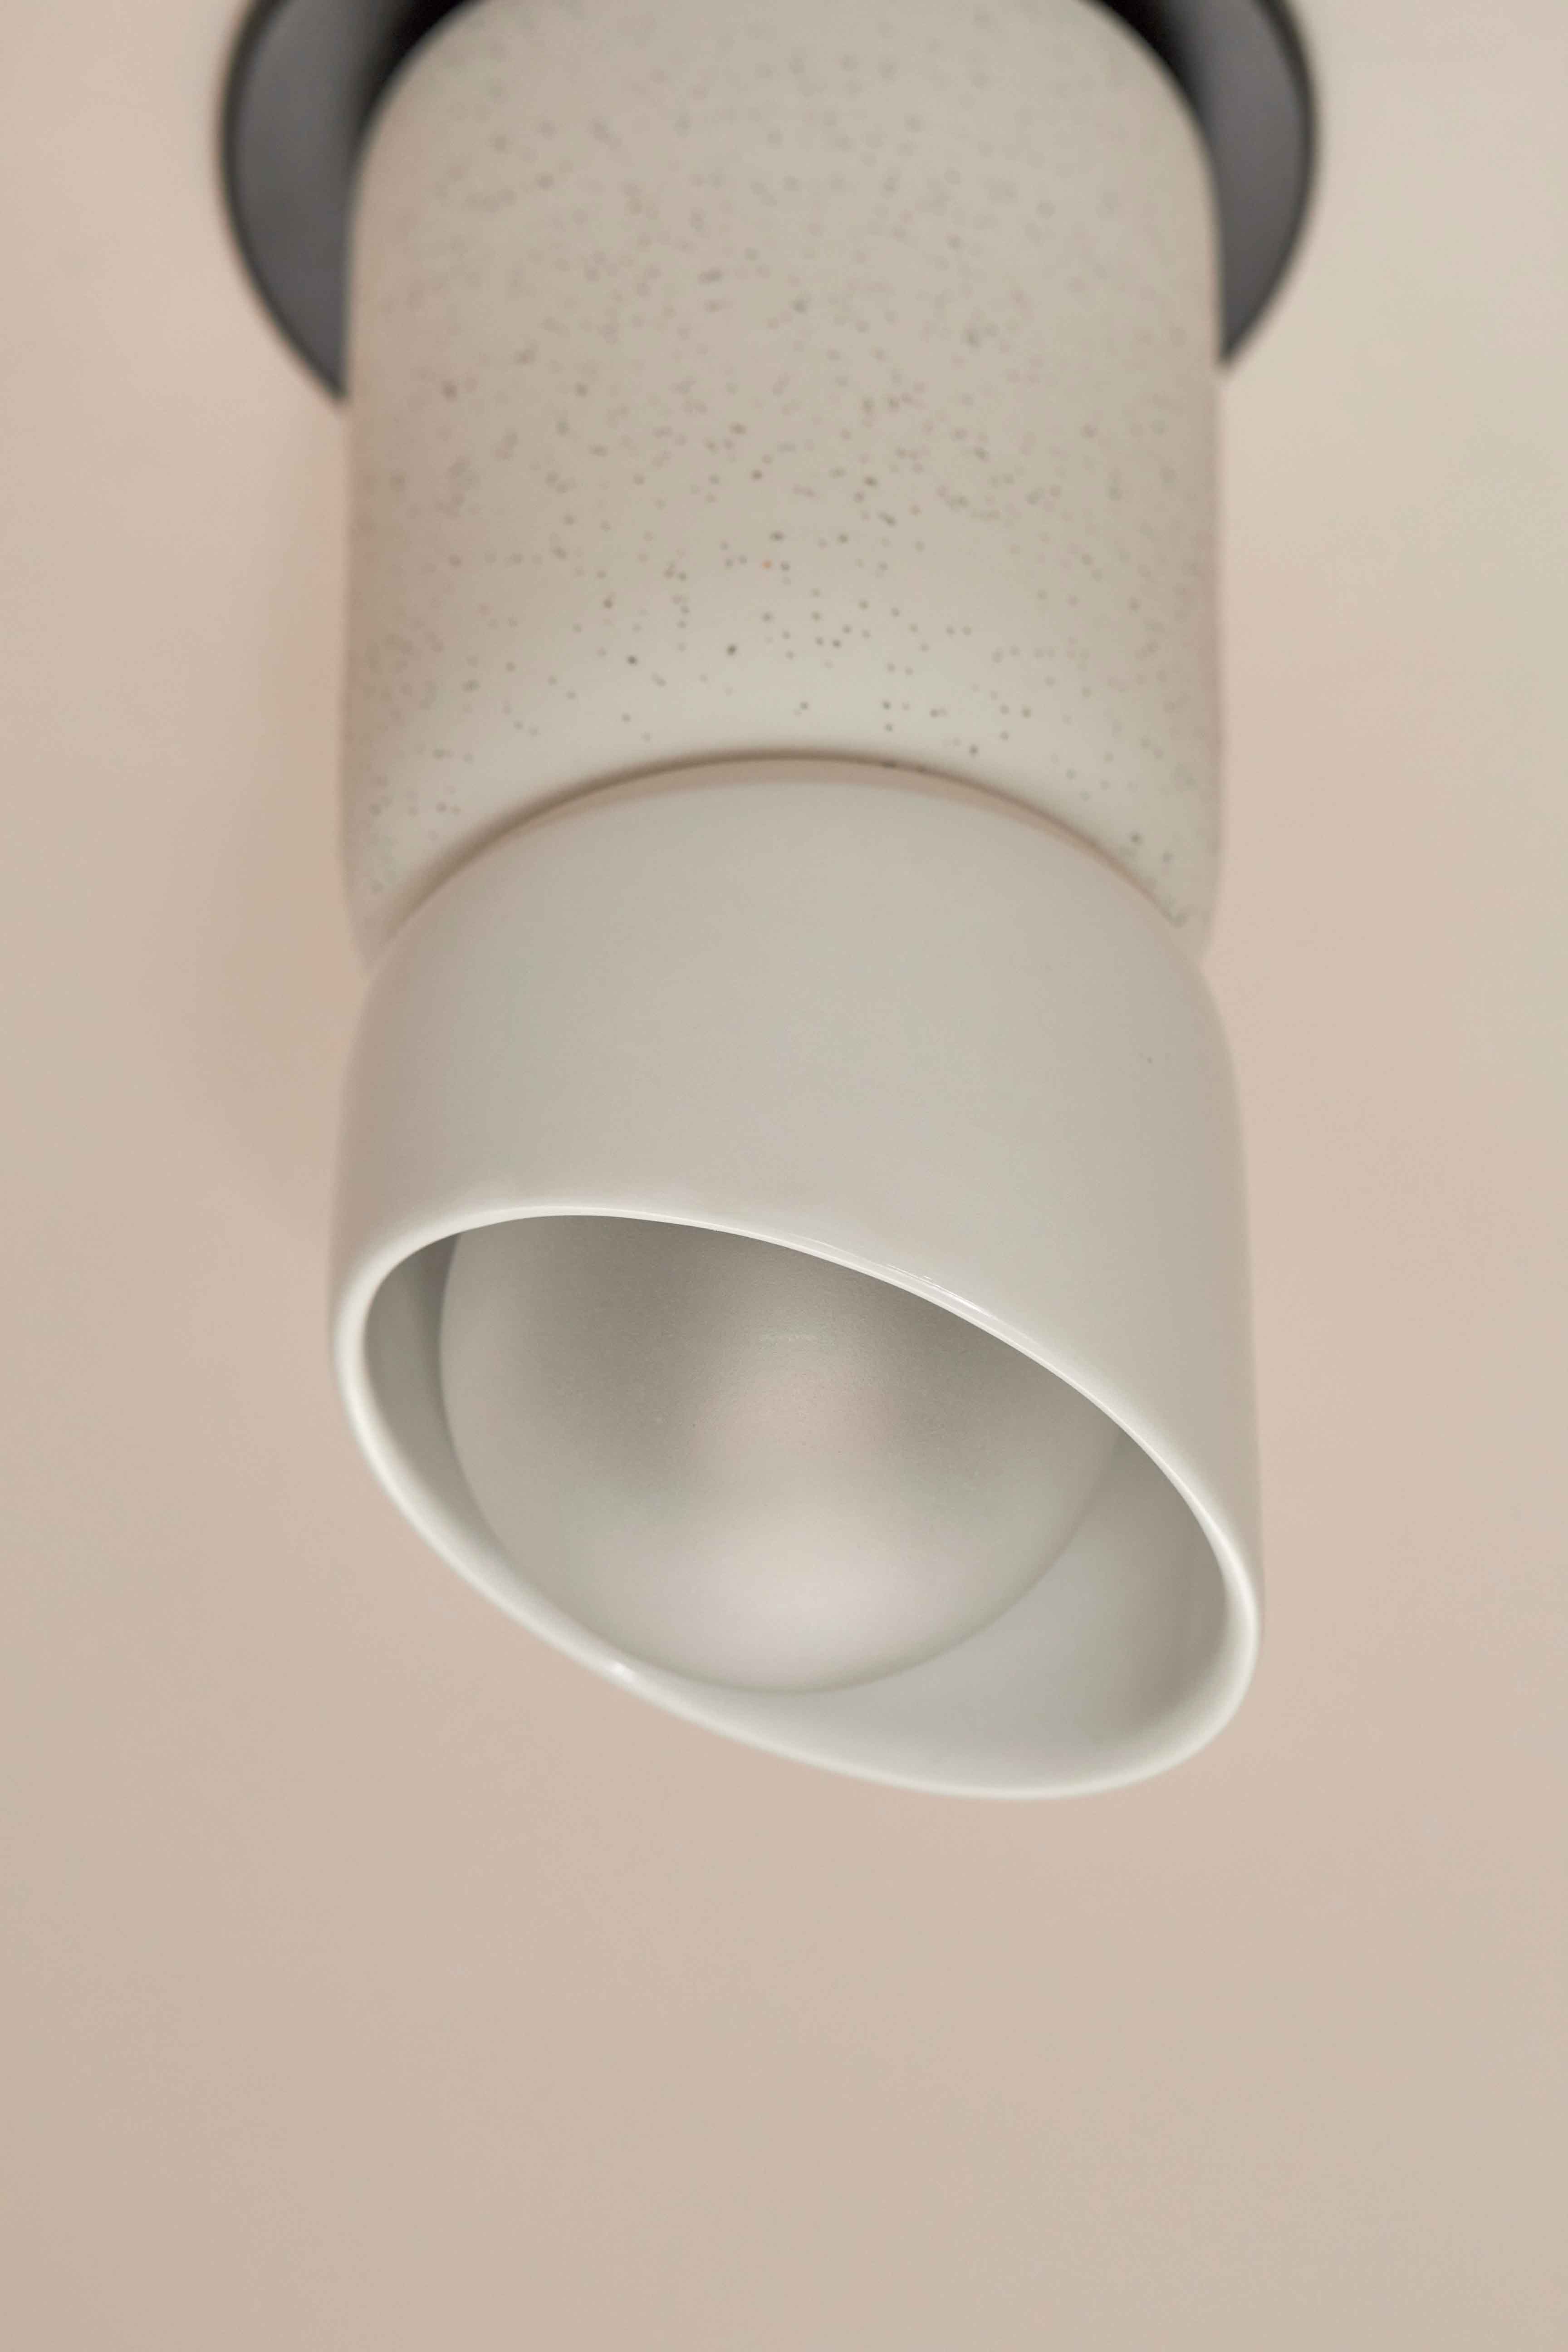 Terra 1.5 Ceiling Light, Slim Base Adapter. Image by Lawrence Furzey